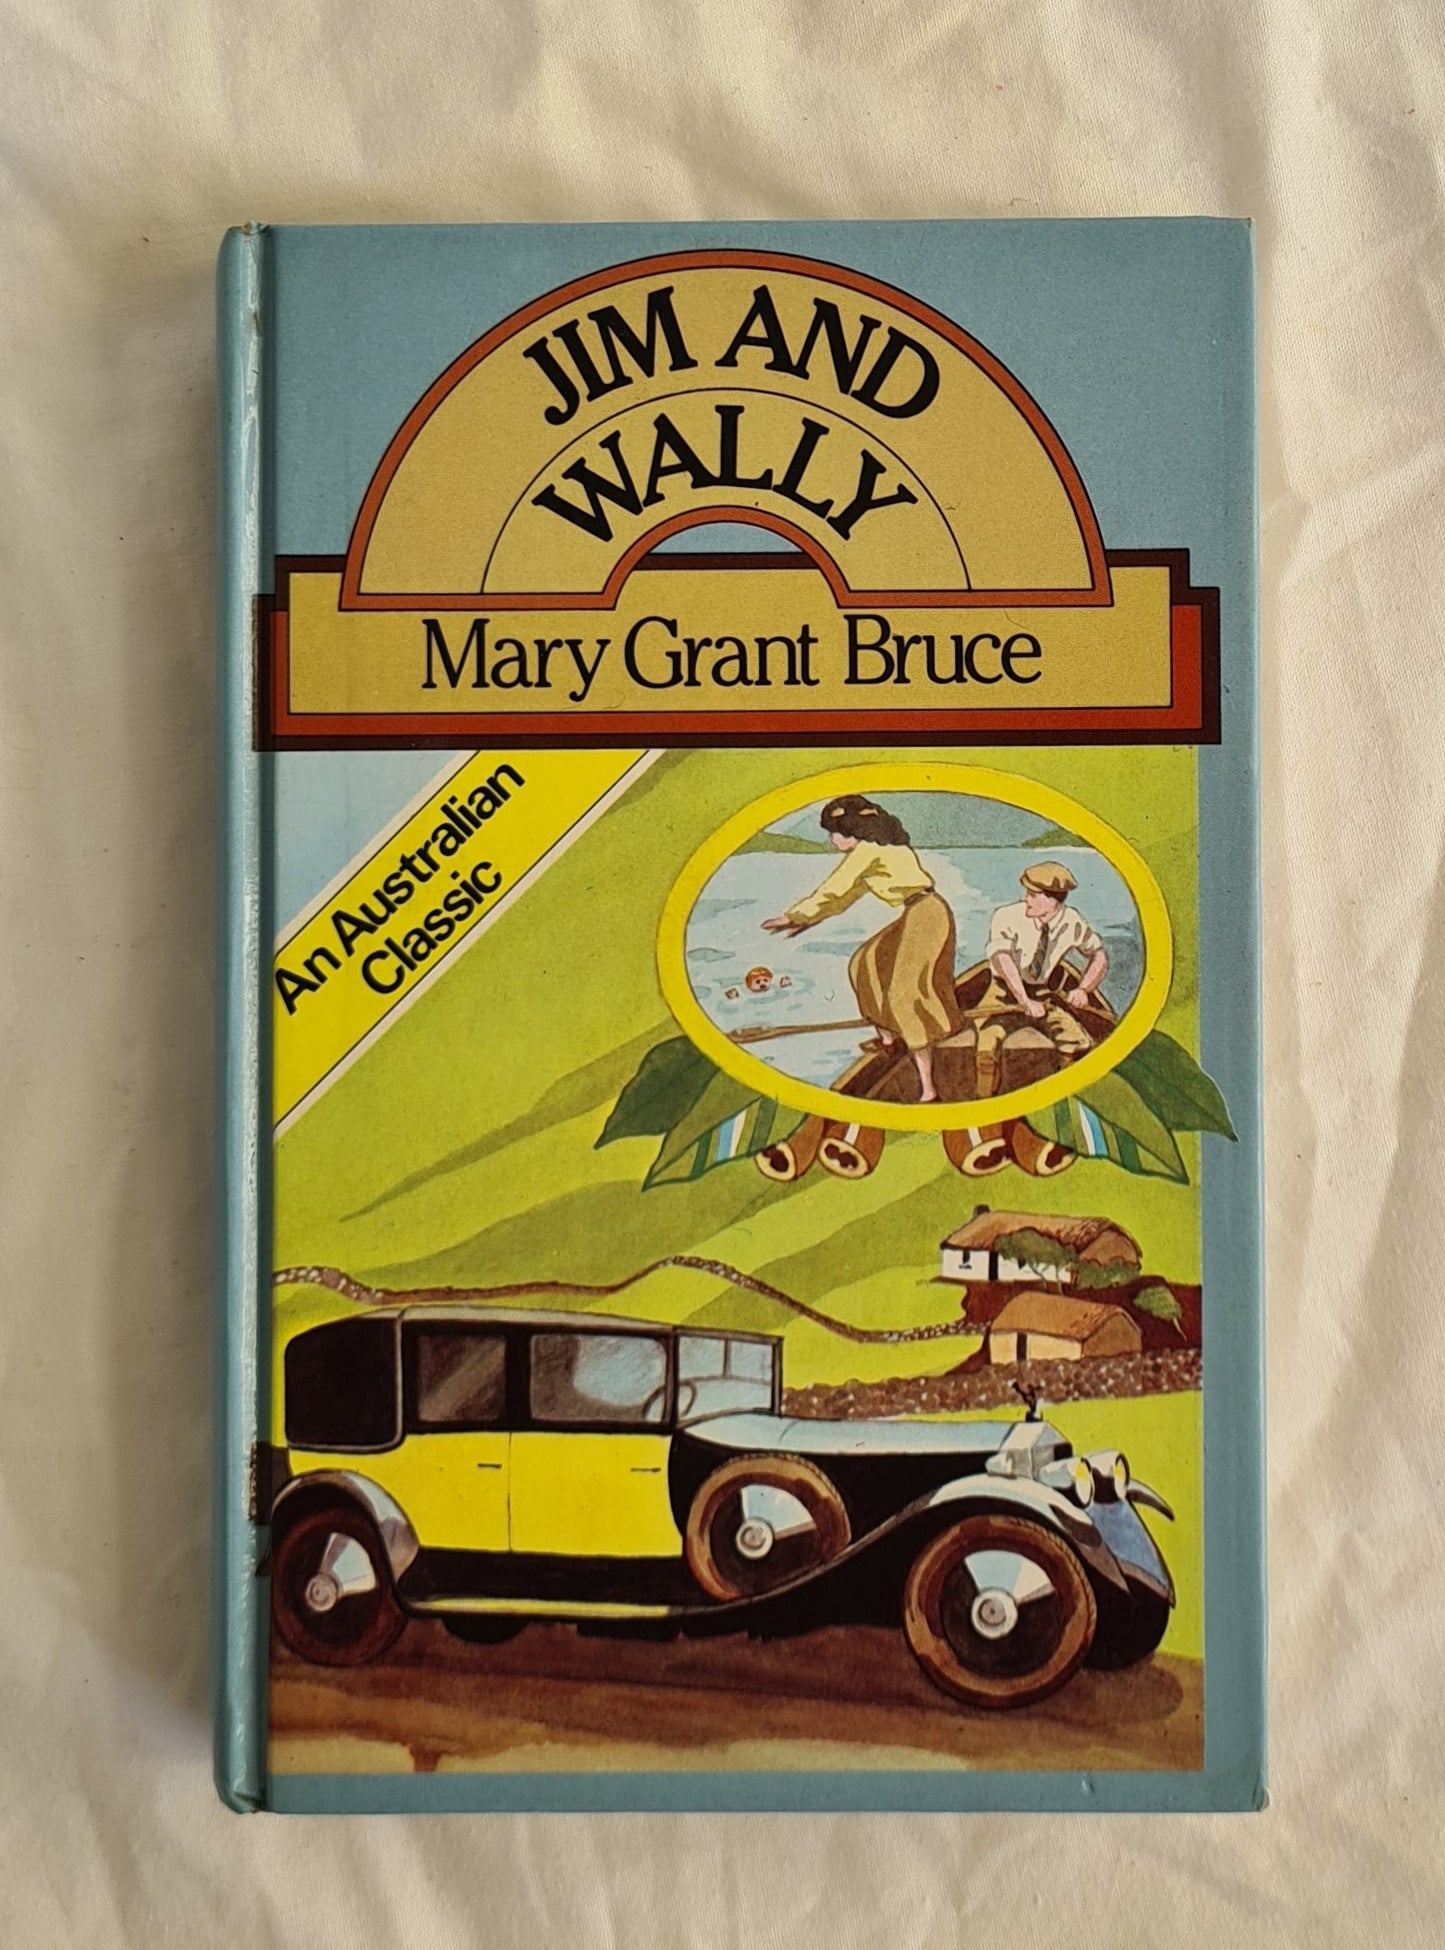 Jim and Wally  by Mary Grant Bruce  The Billabong Books